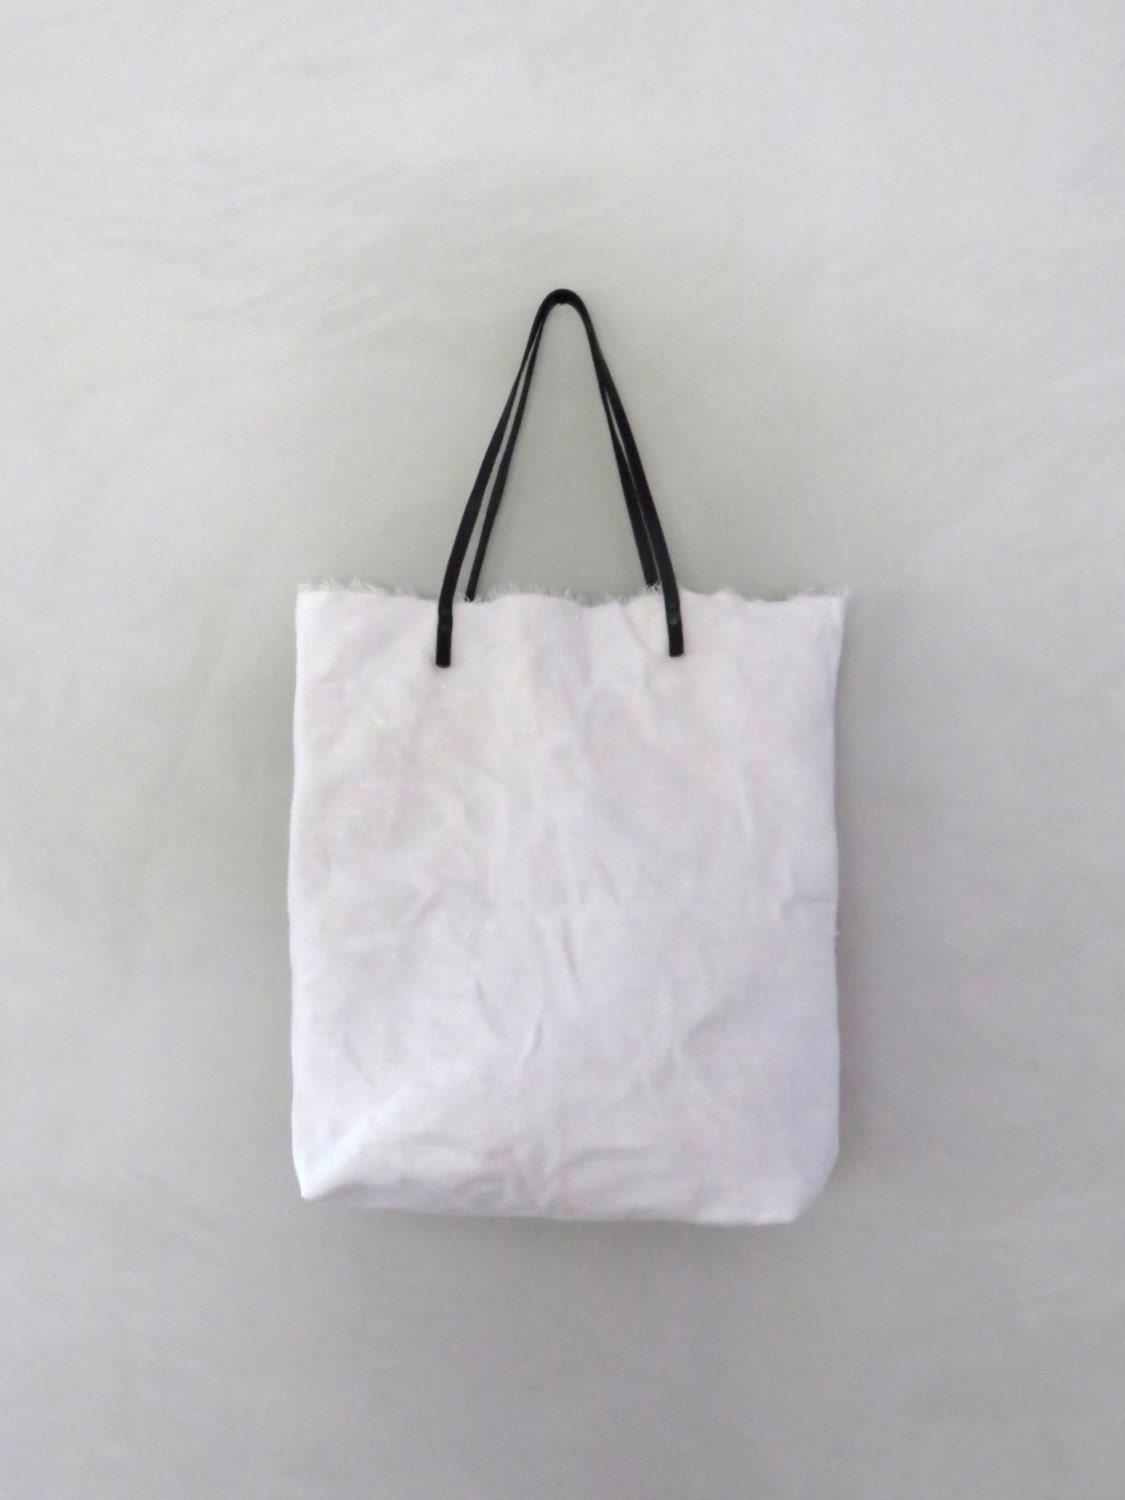 Large Tote Bag Canvas Tote Bag with Leather Straps White